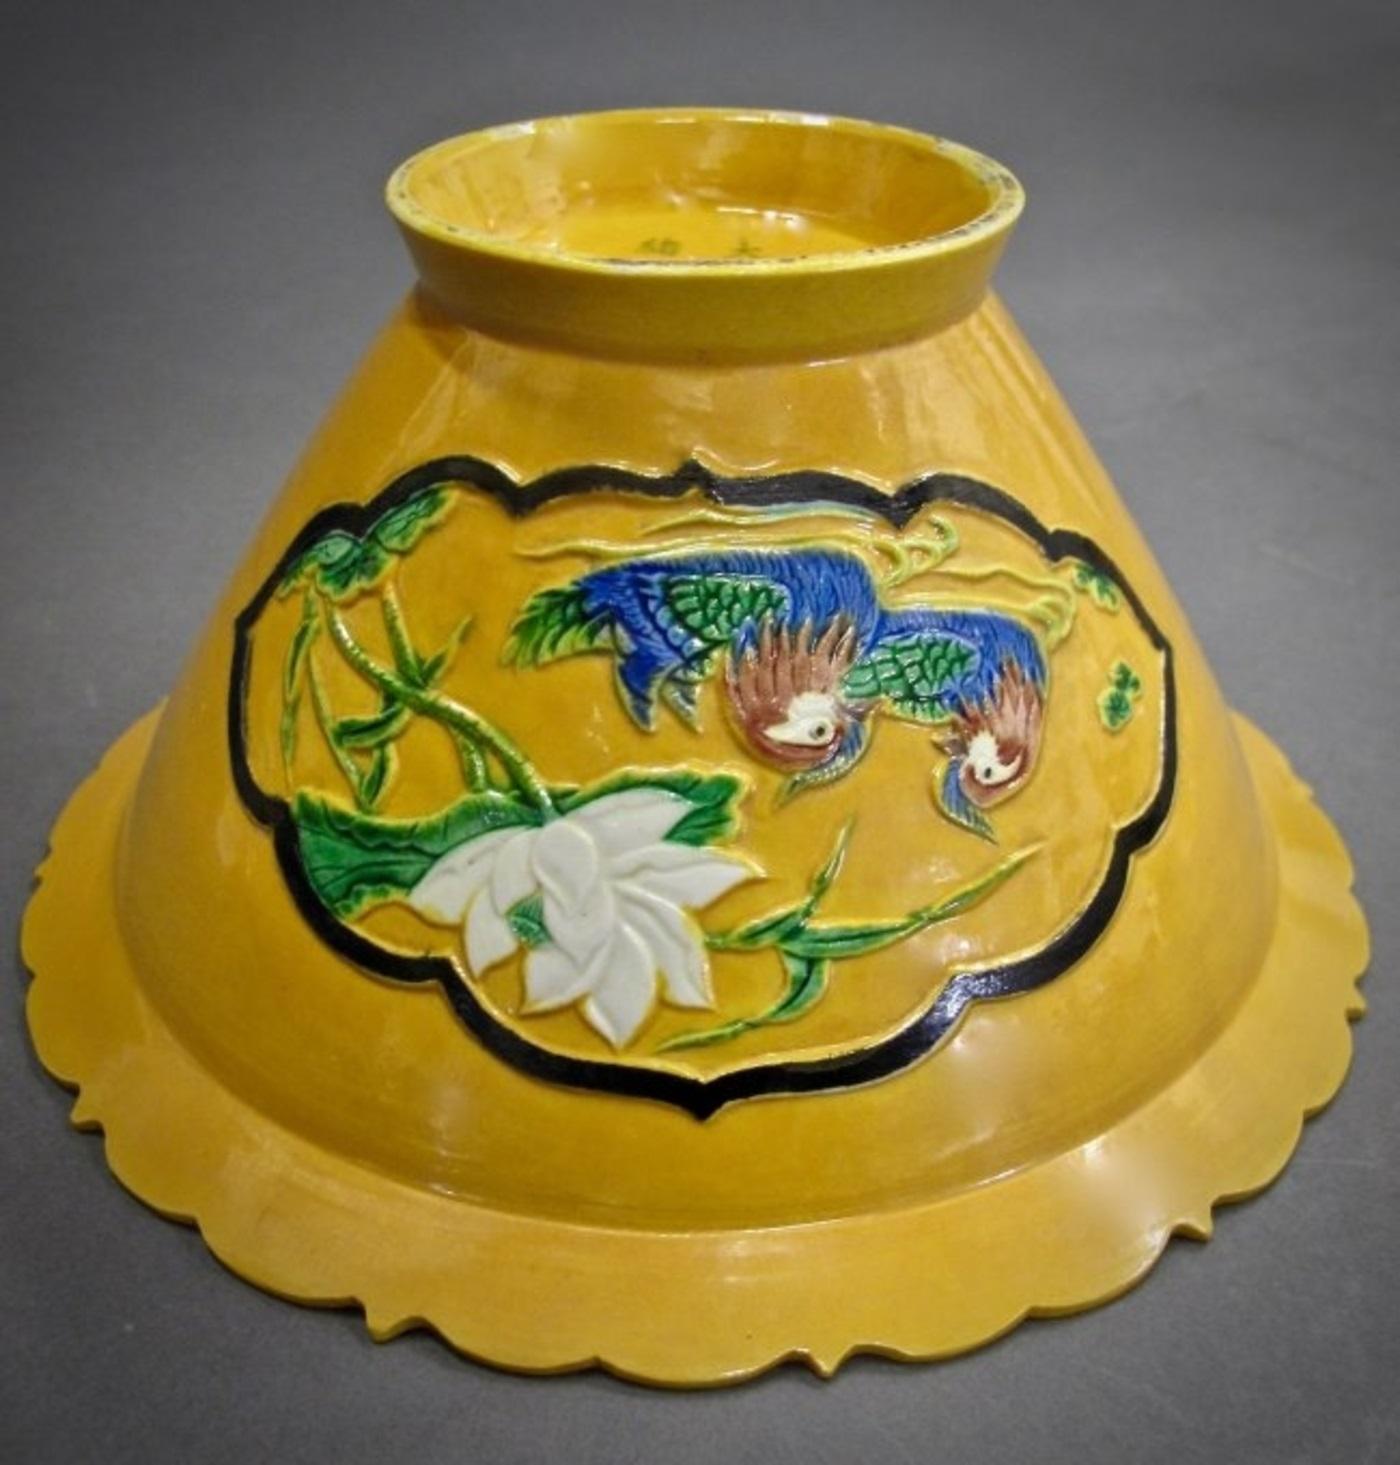 Yellow Glazed Porcelain Bowl In Good Condition For Sale In West Palm Beach, FL